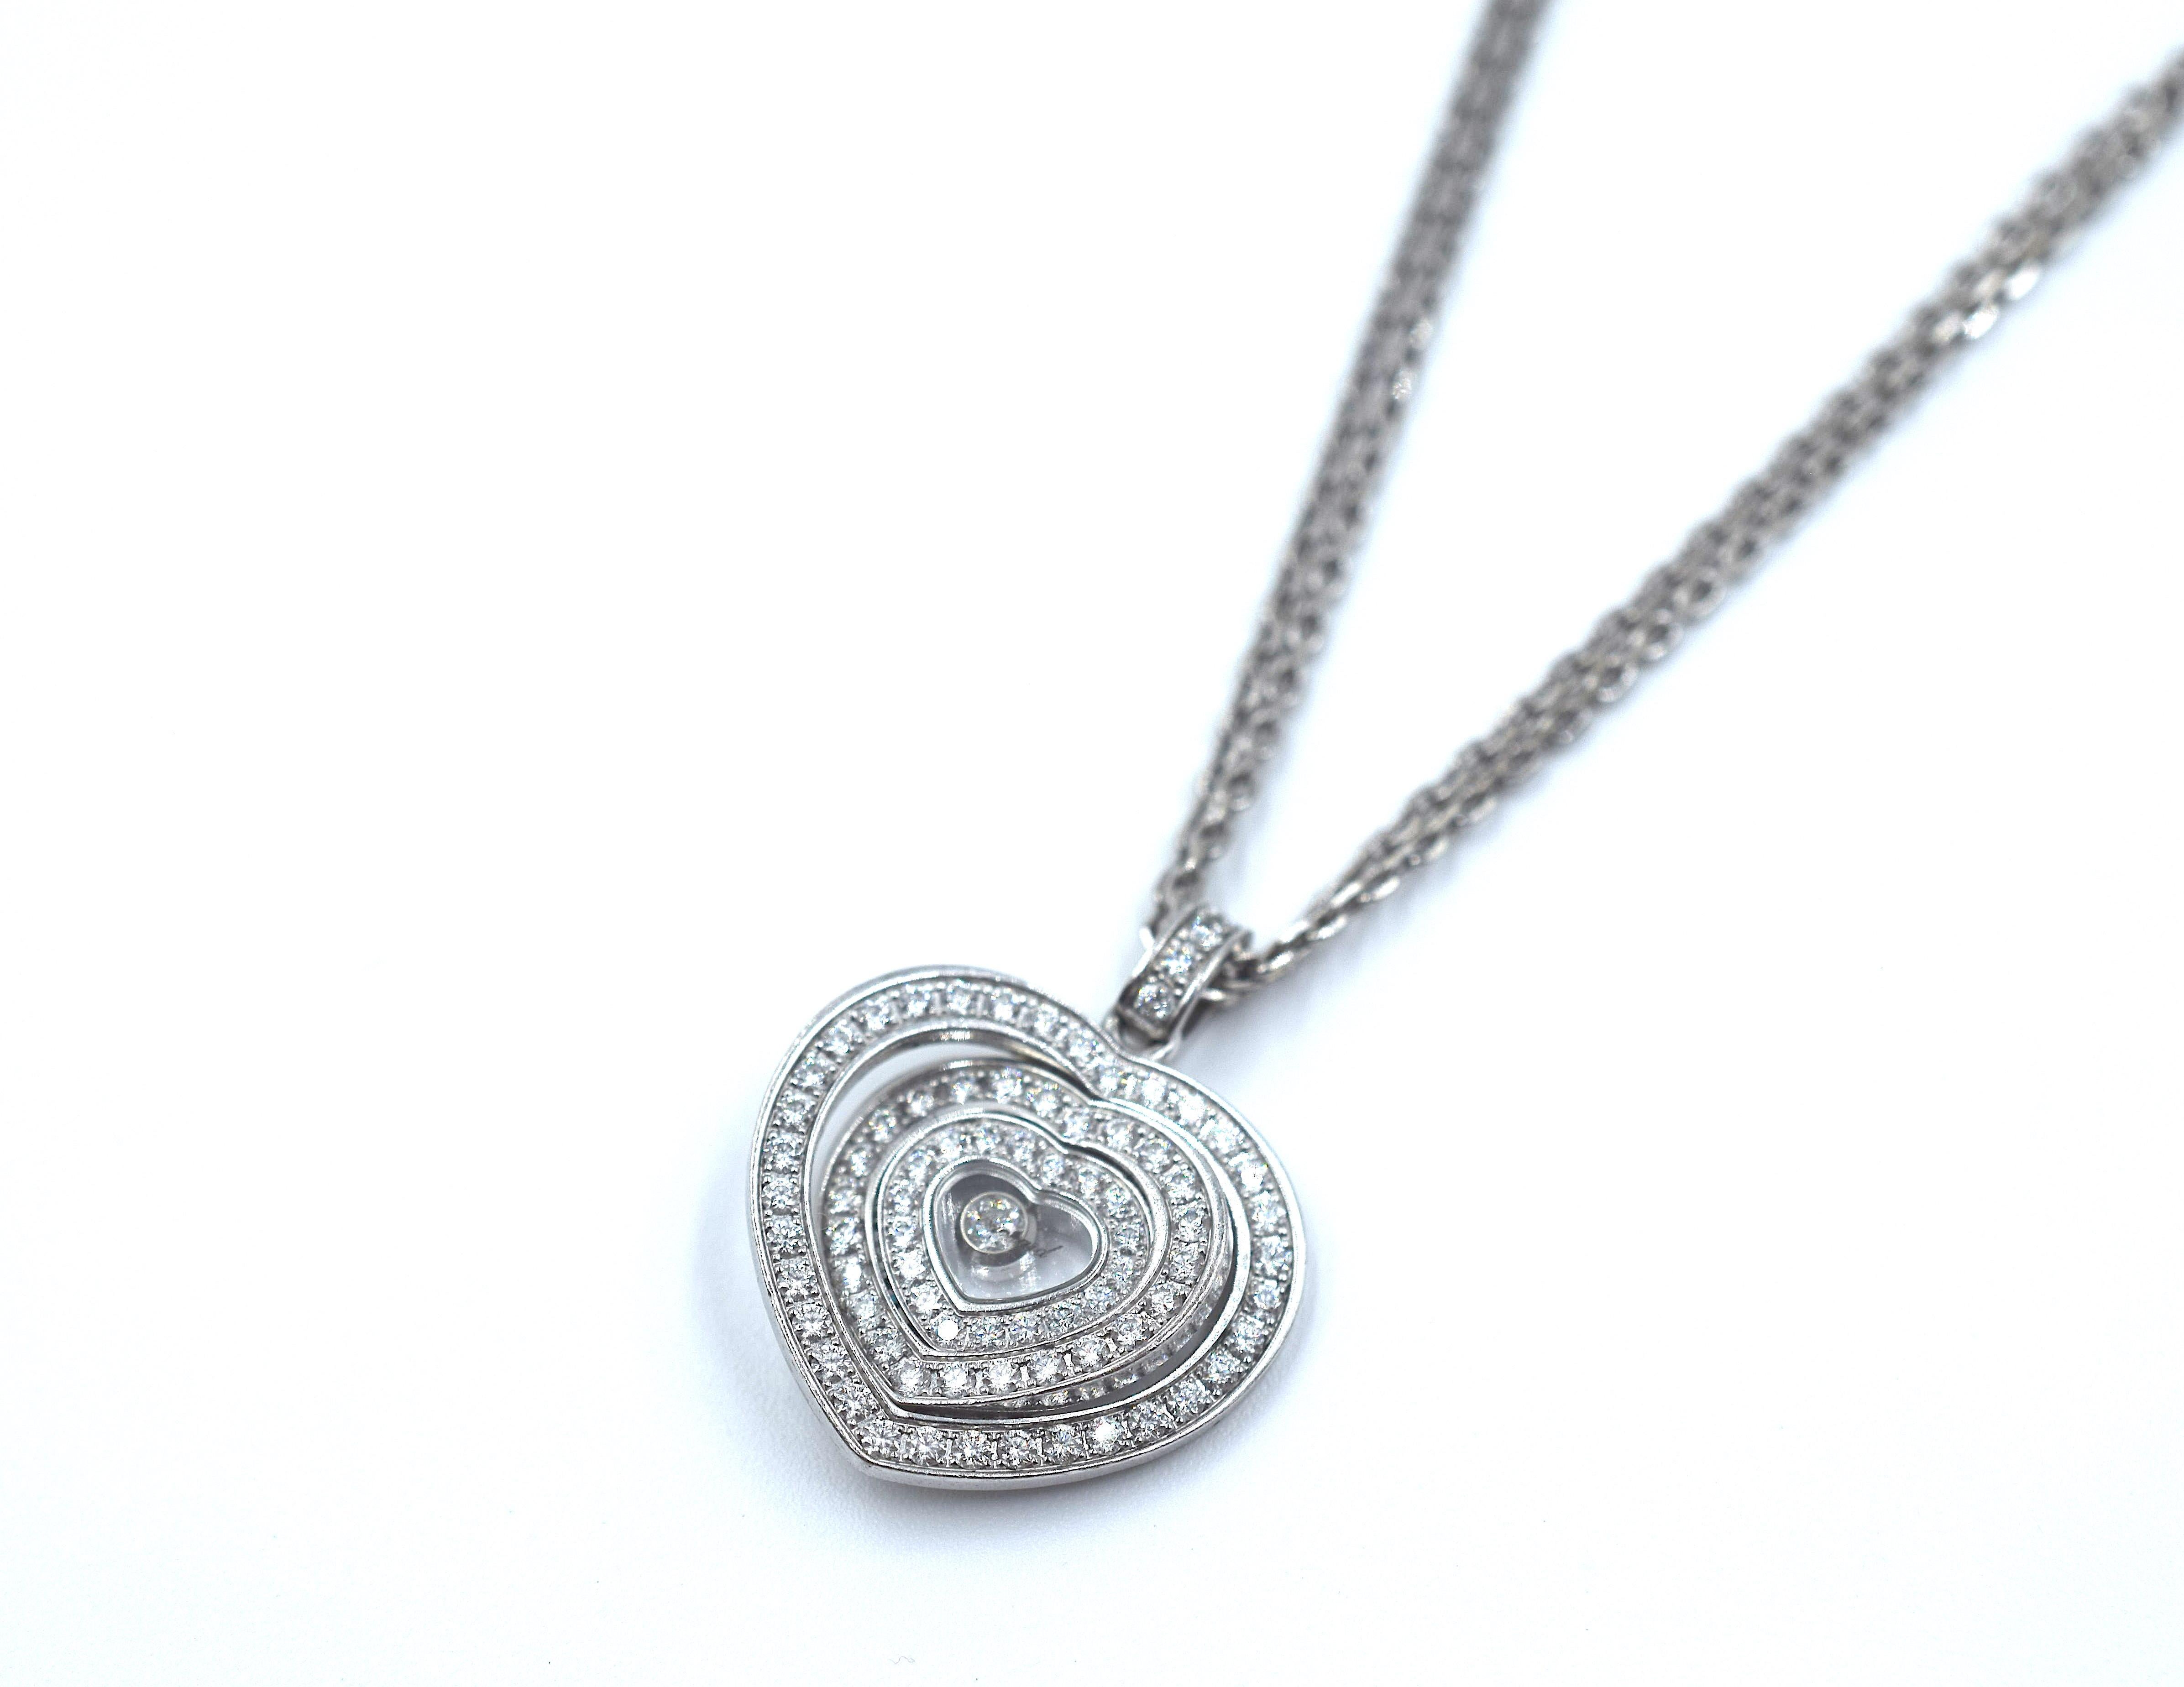 This amazing pendant from Chopard's Happy Spirit collection. Three diamond set heart shape frames decrease in size towards the central single iconic floating diamond. Crafted in all 18k white gold with a18k white gold double strand chain running